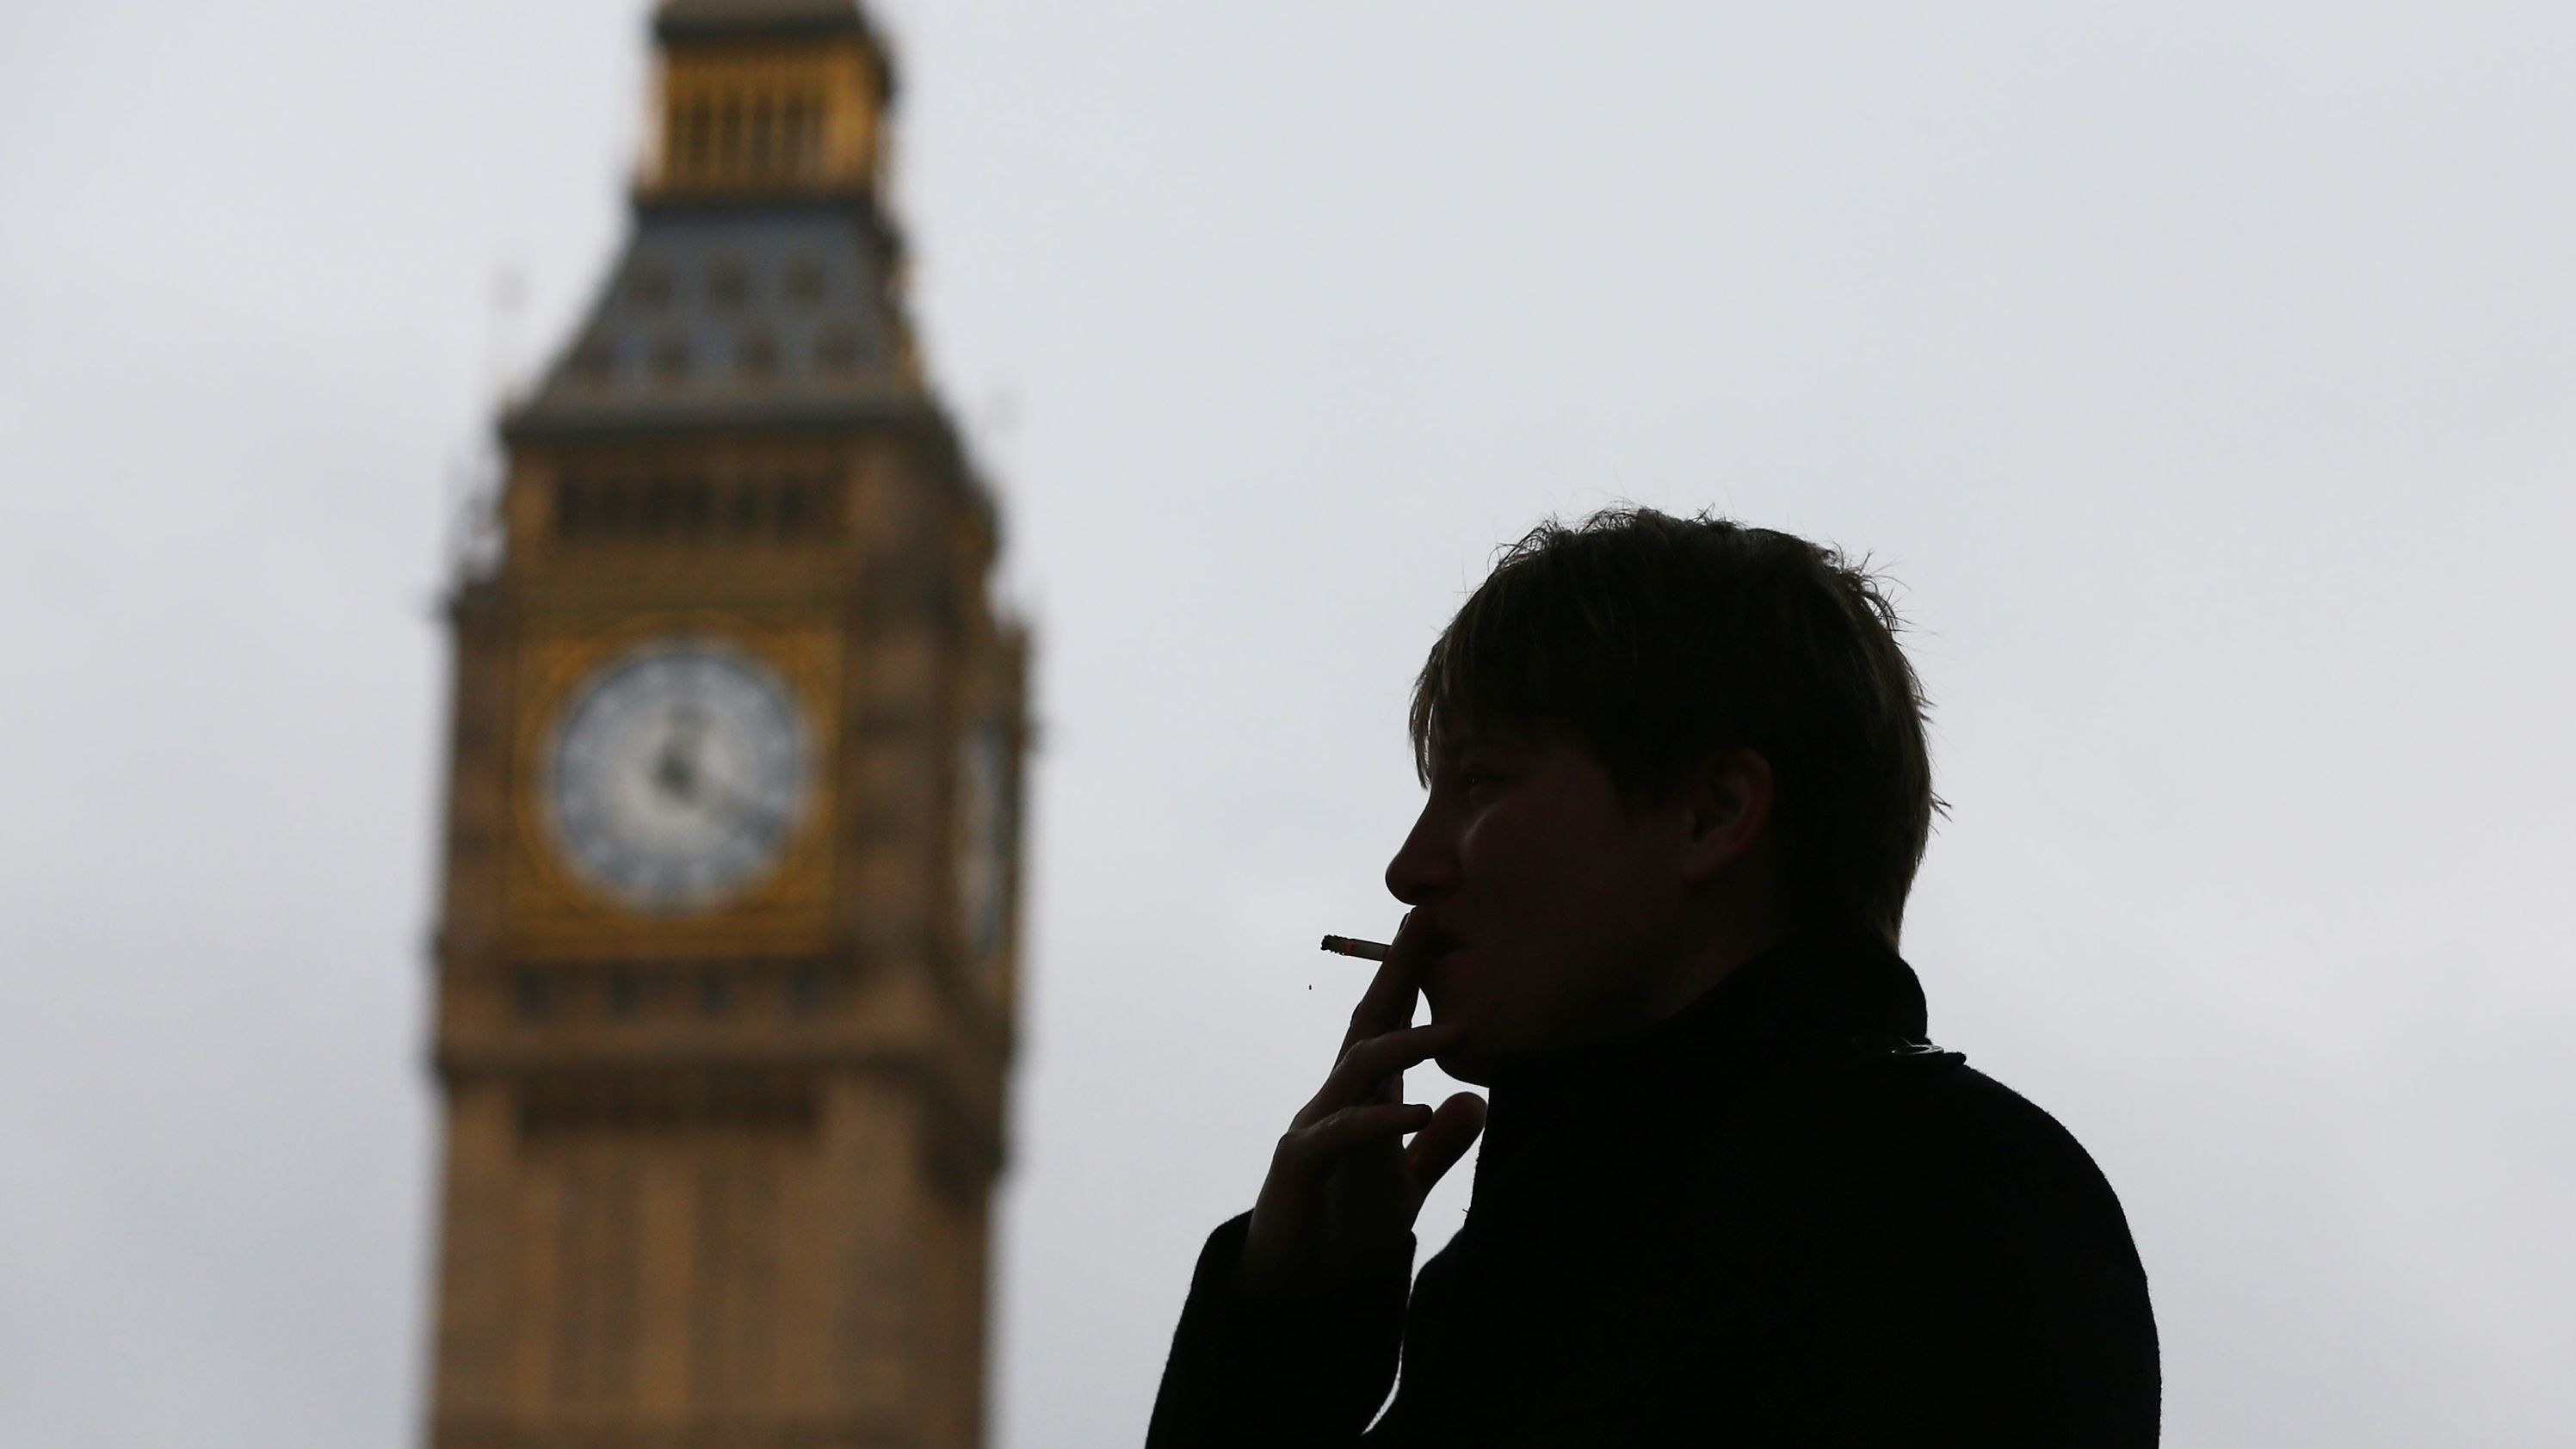 England has banned smoking in cars where children are present, which will be in force from October 1, 2015.